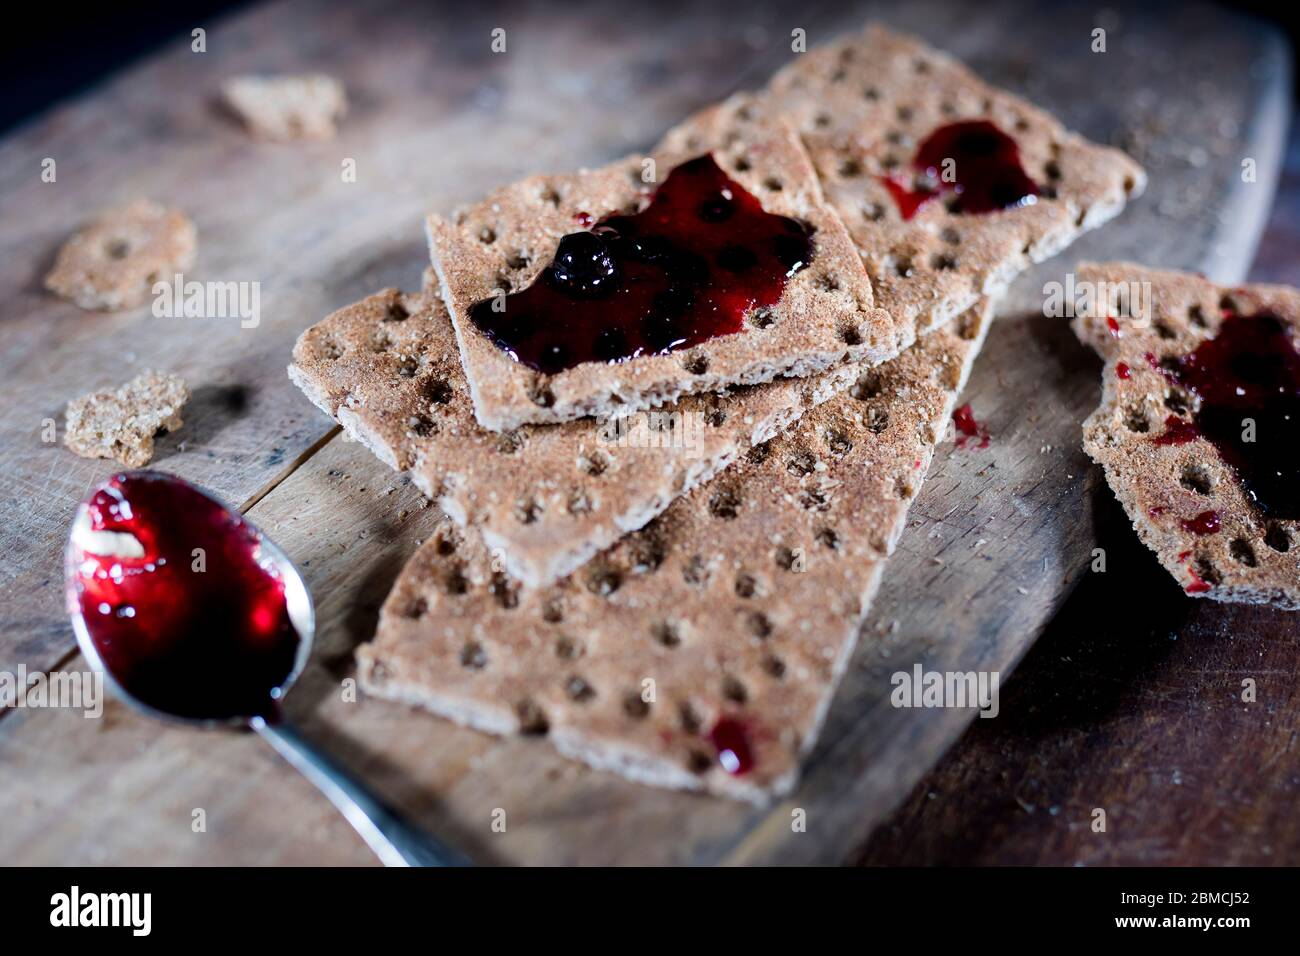 Open jar with blackcurrant jam on a wooden cutting board. Dry biscuits spread with jam, crumbs and a spoon in jam. Space for text. Stock Photo